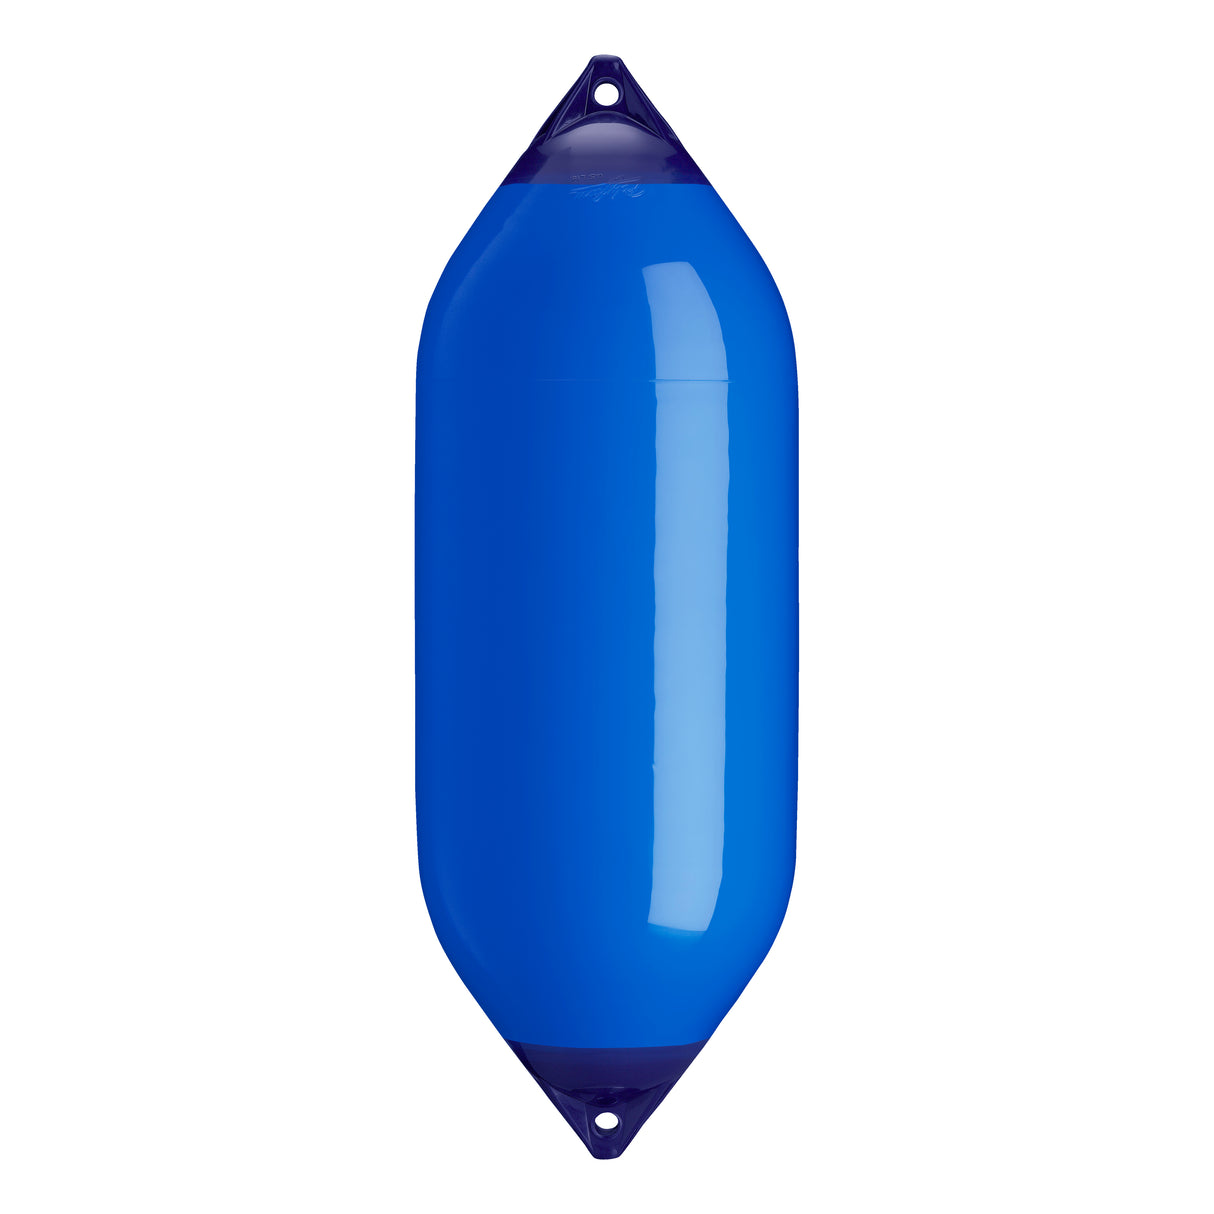 Blue boat fender with Navy-Top, Polyform F-10 